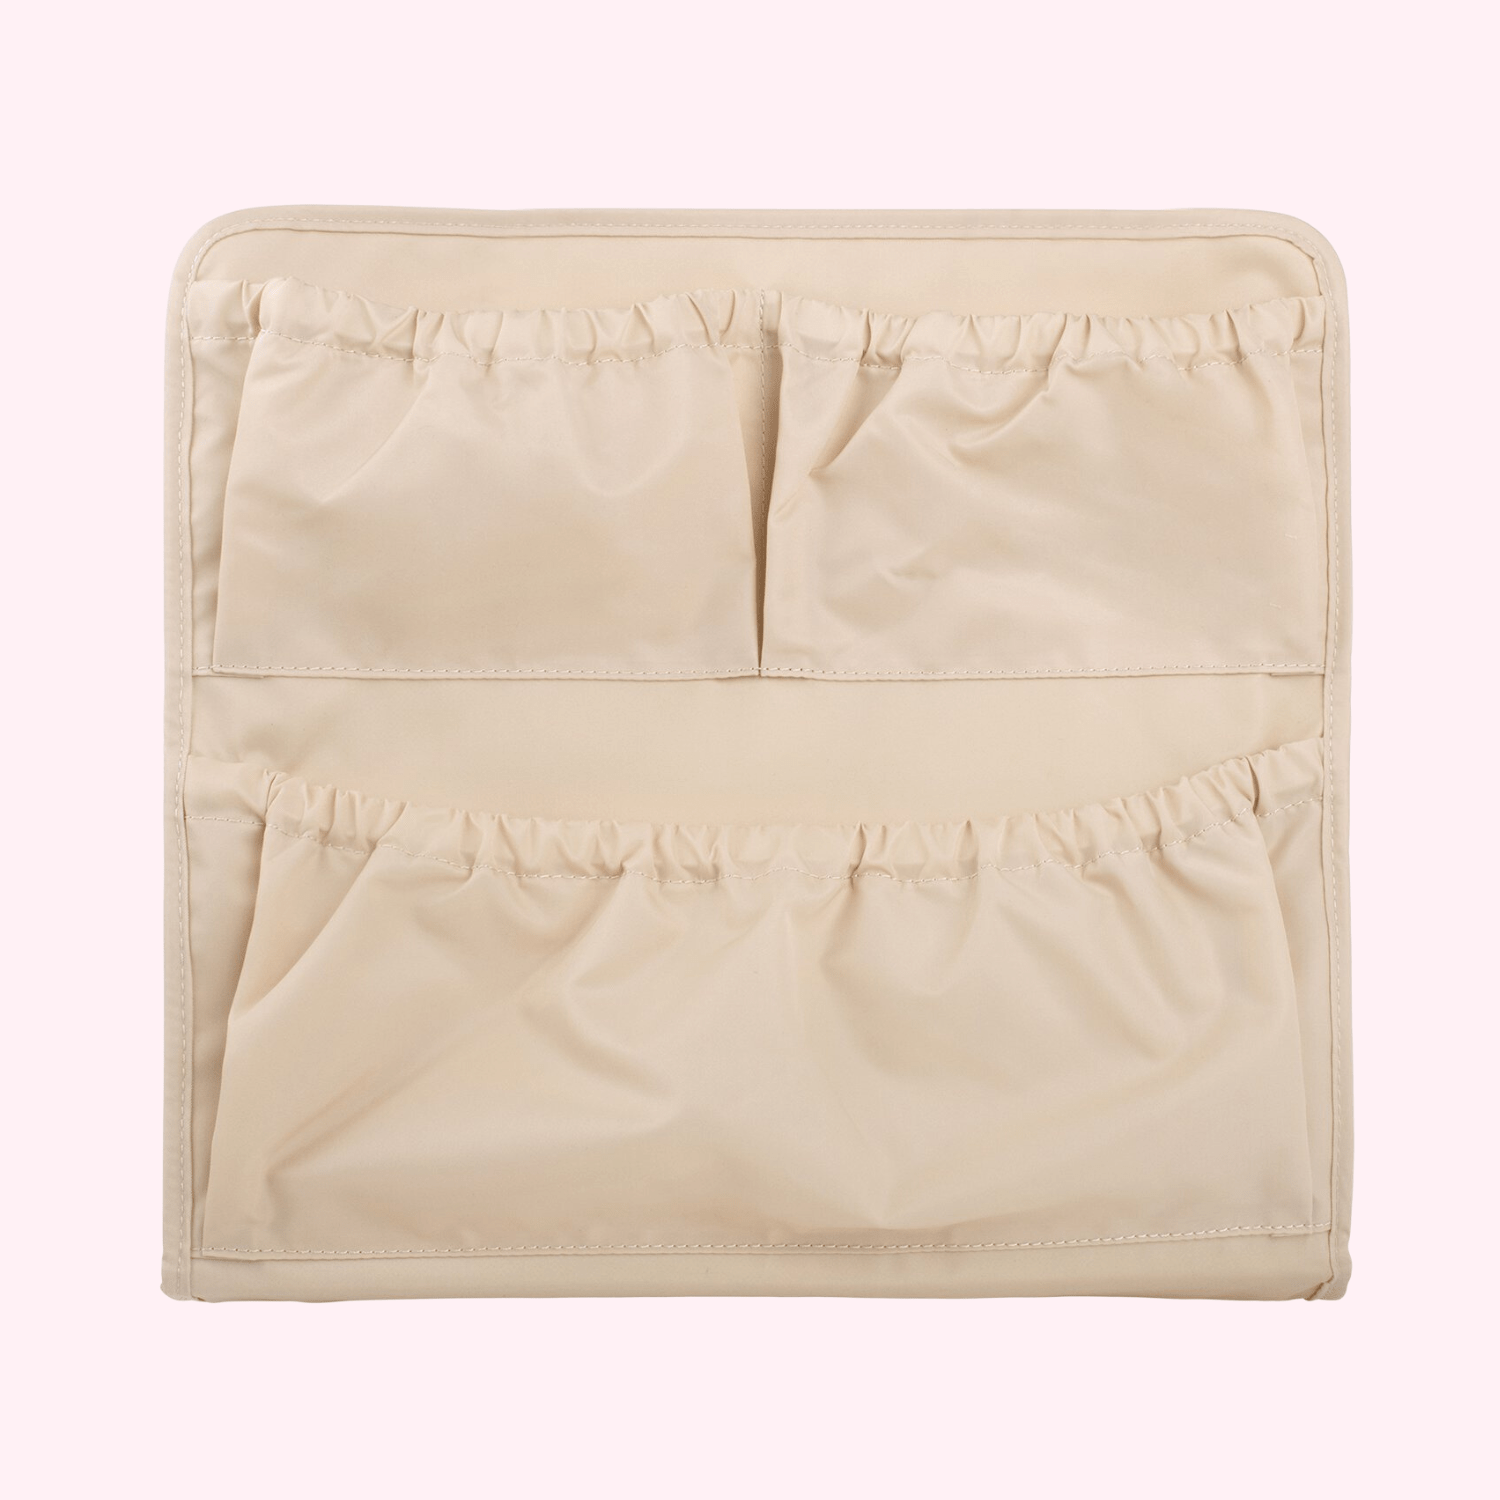 the miller affect reviewing a diaper bag insert for her LV